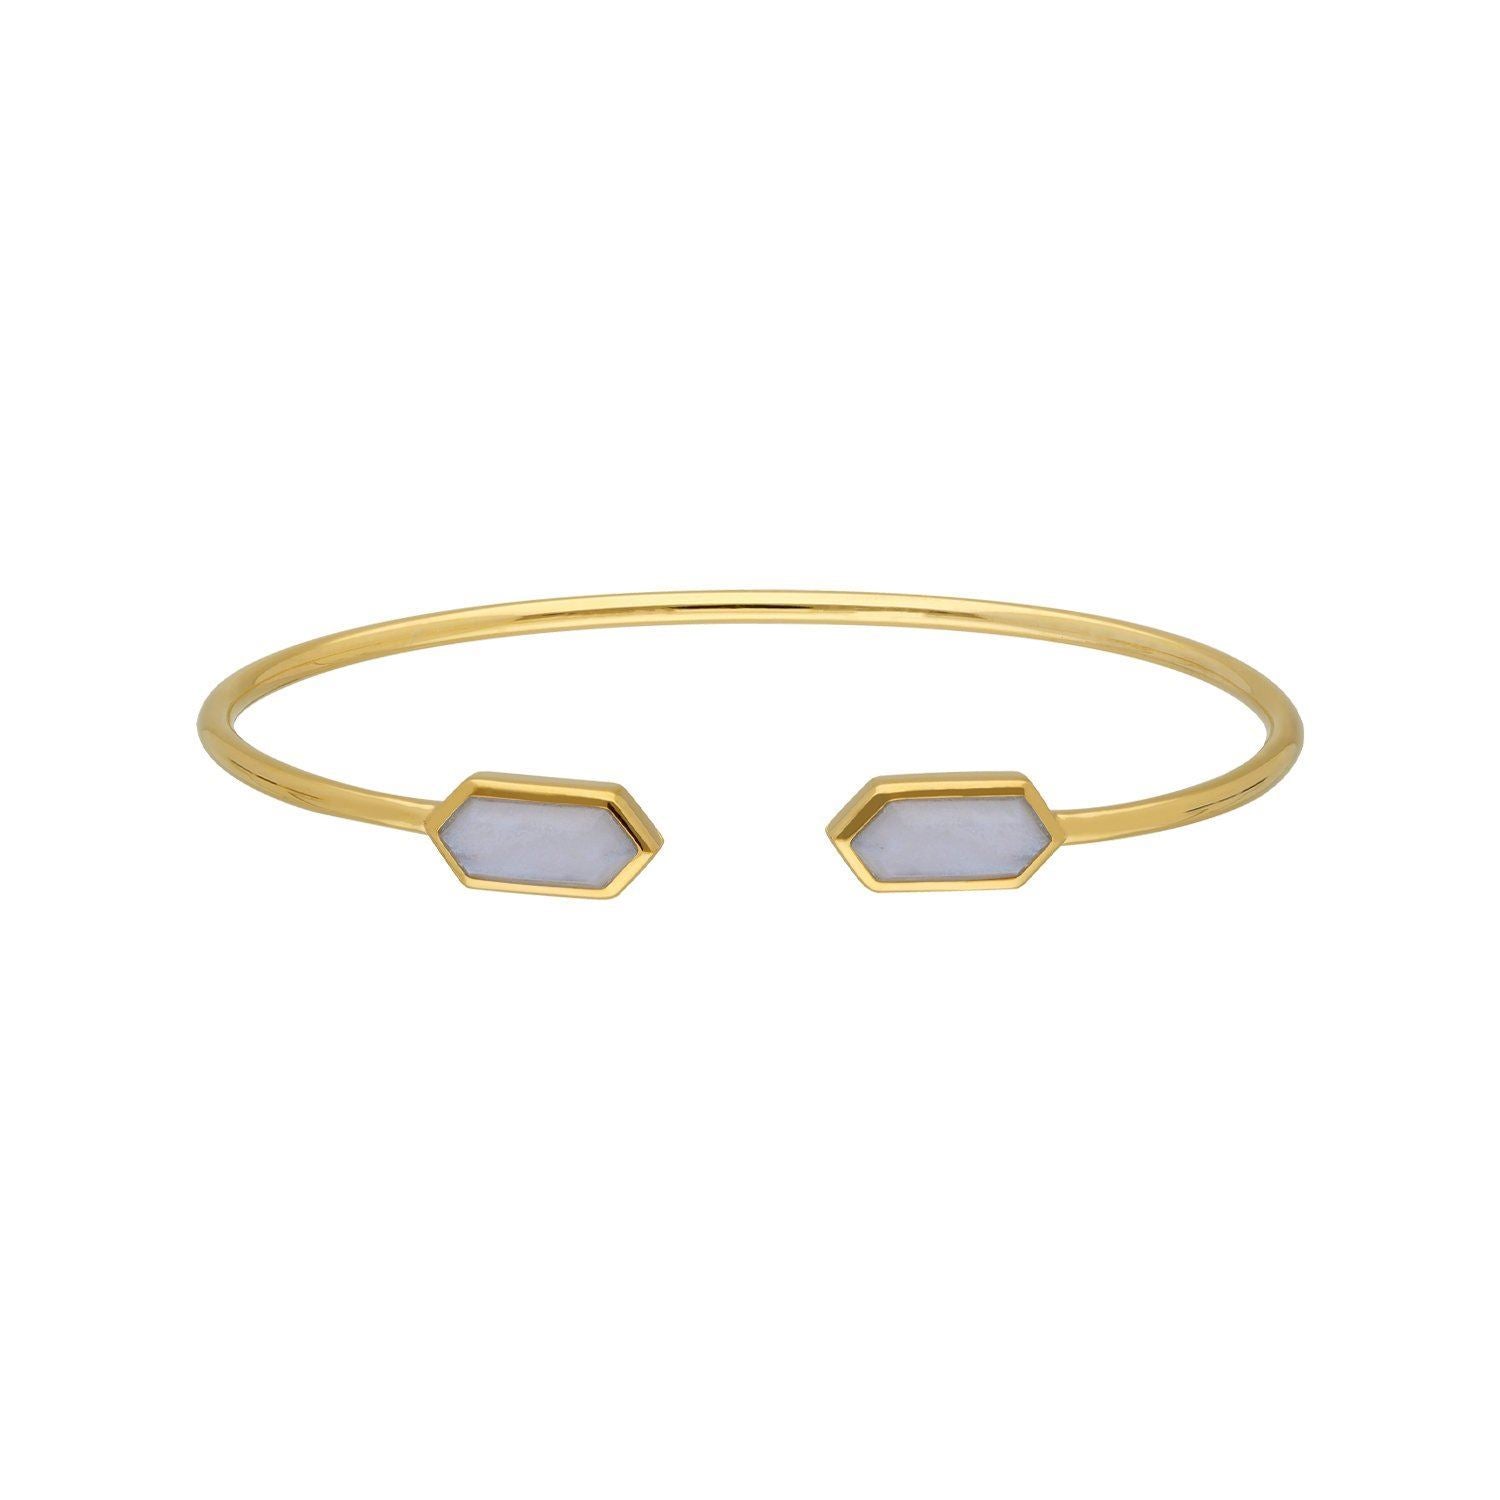 Geometric Blue Lace Agate Open Bangle in Gold Plated Sterling Silver